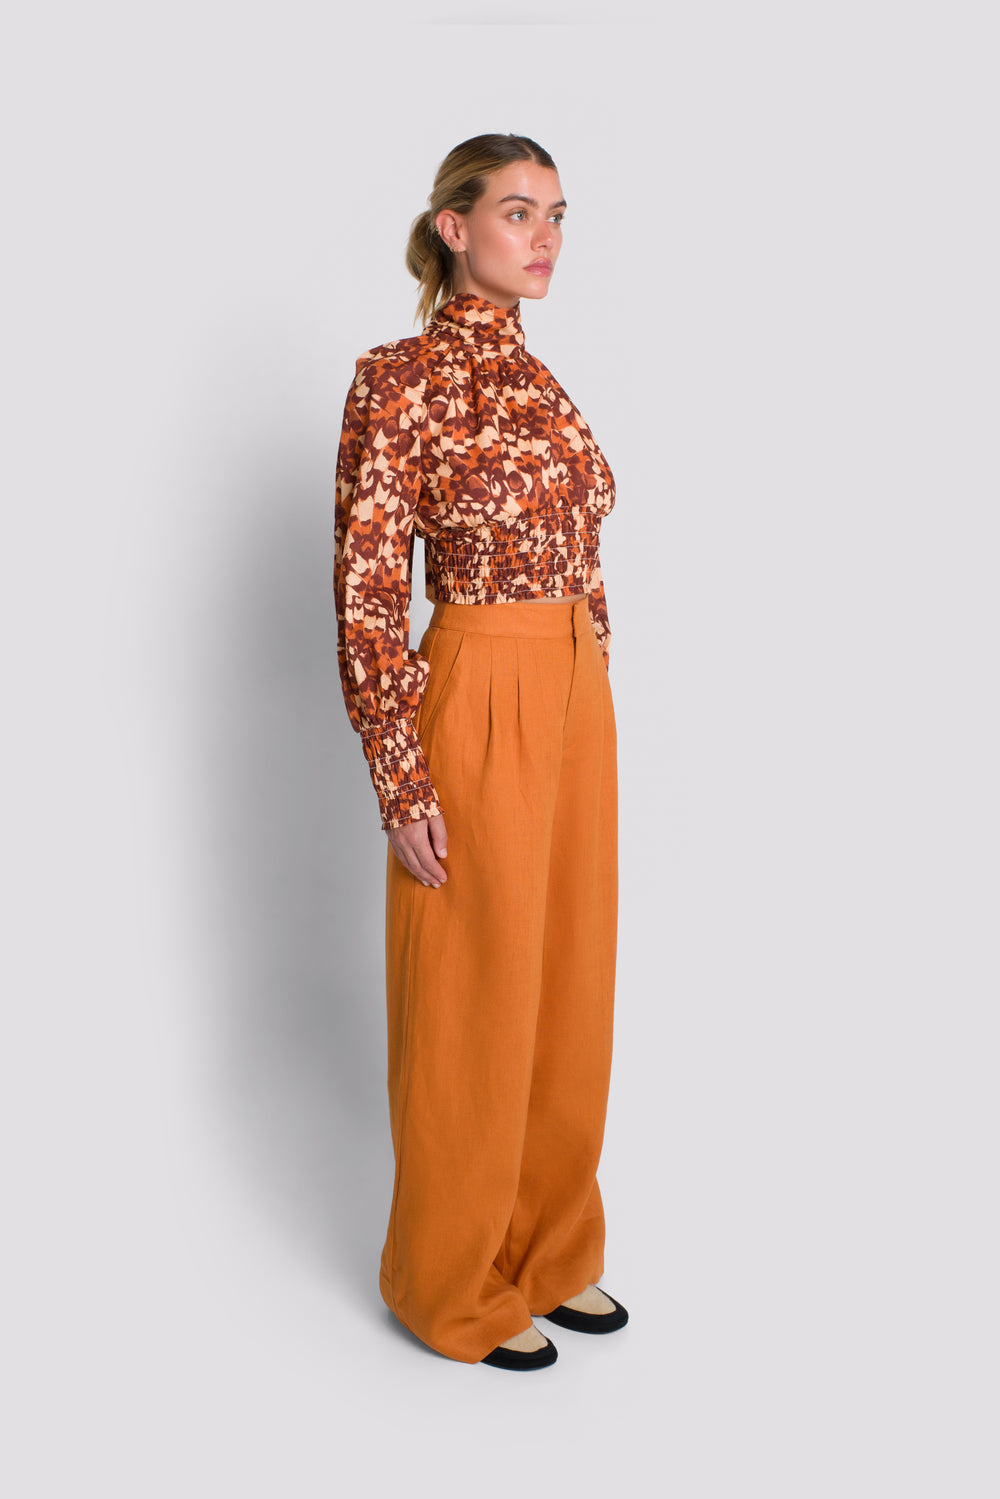 Arman Top - Abstract Wing Print| Sunset Lover